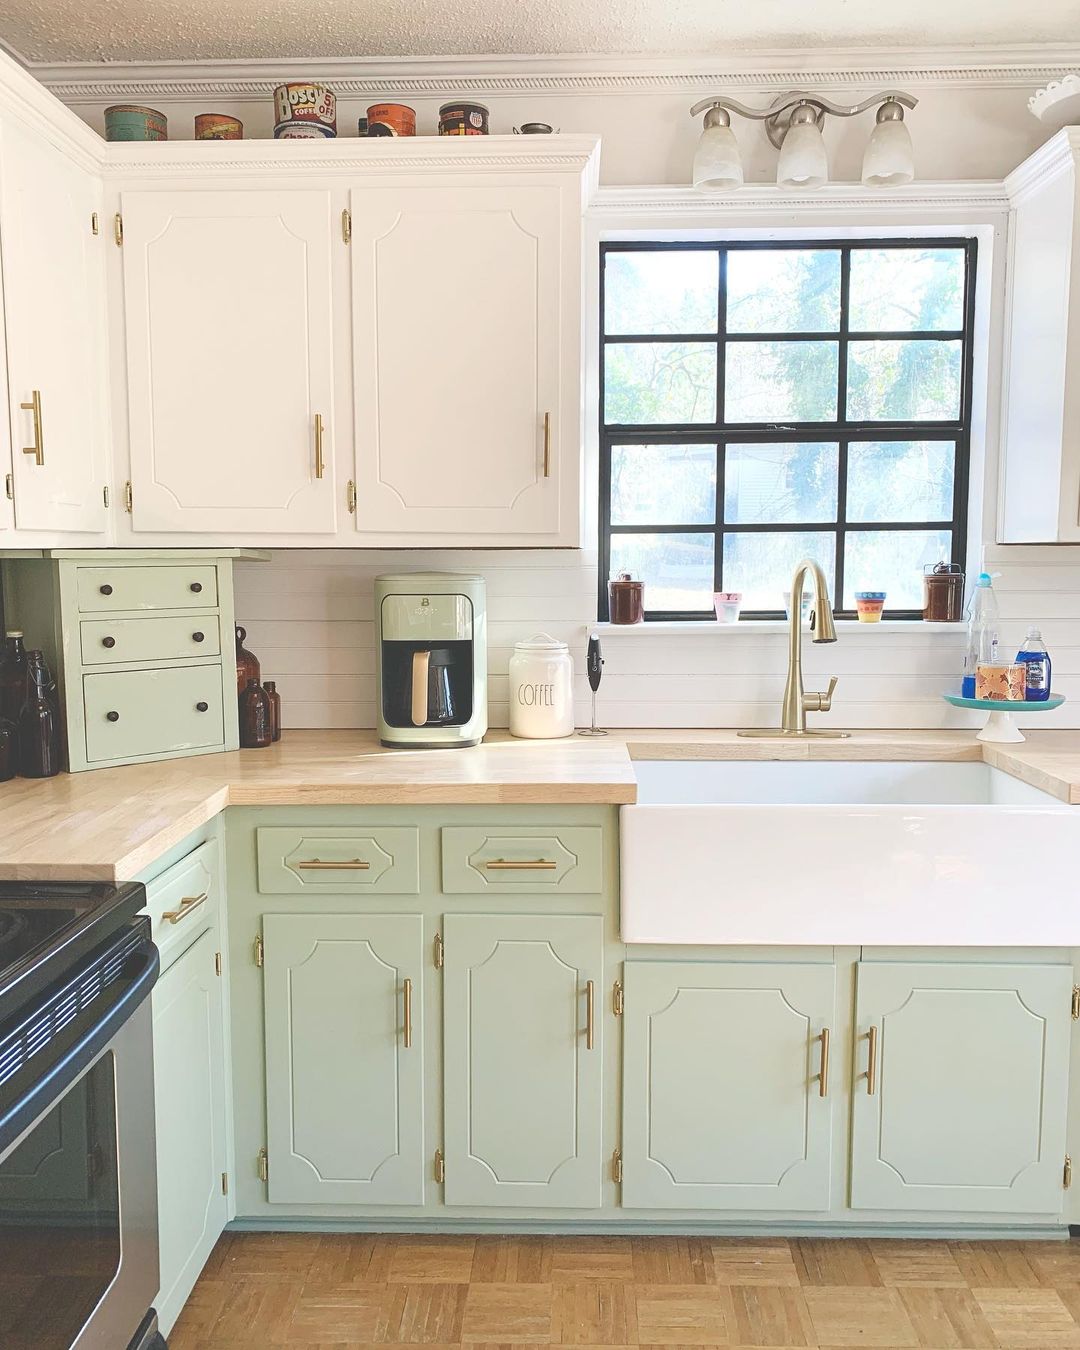 Kitchen interior with butcher block countertops and two-toned cabinets. Photo by Instagram user @rebeccaannehome.